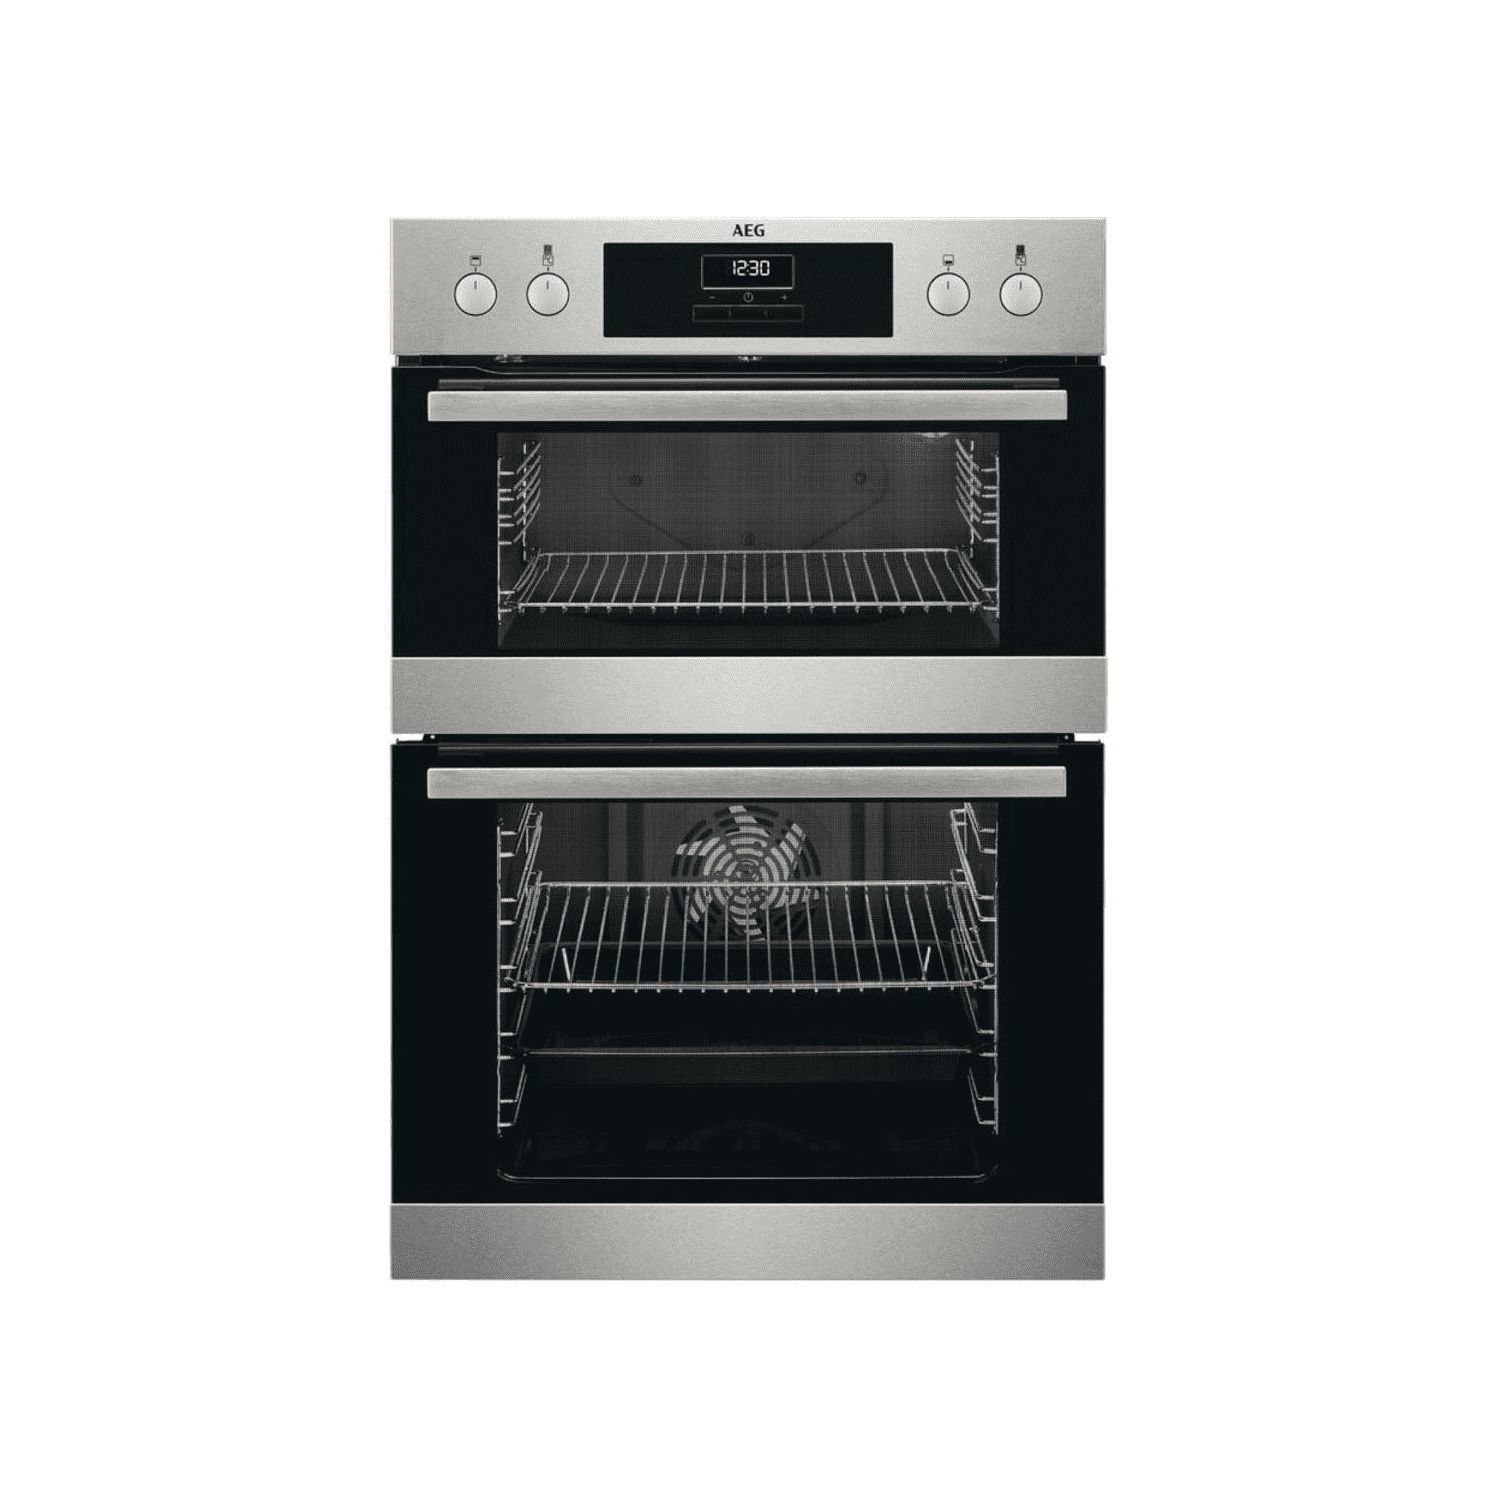 AEG Electric Built In Double Oven with Catalytic Cleaning - Stainless Steel